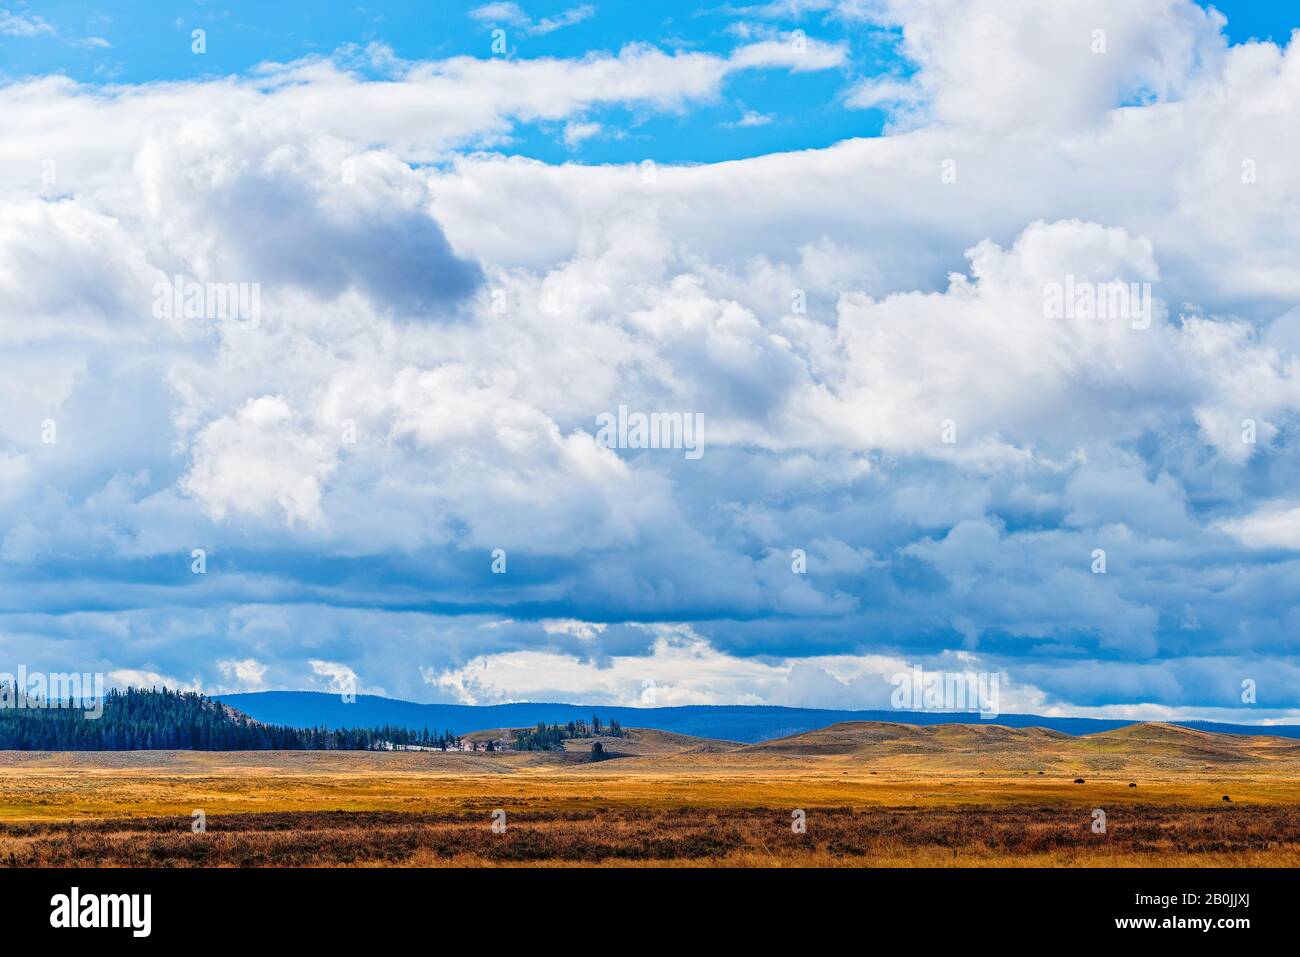 Big white fluffy clouds in skies with green forest and golden mountains below. Stock Photo